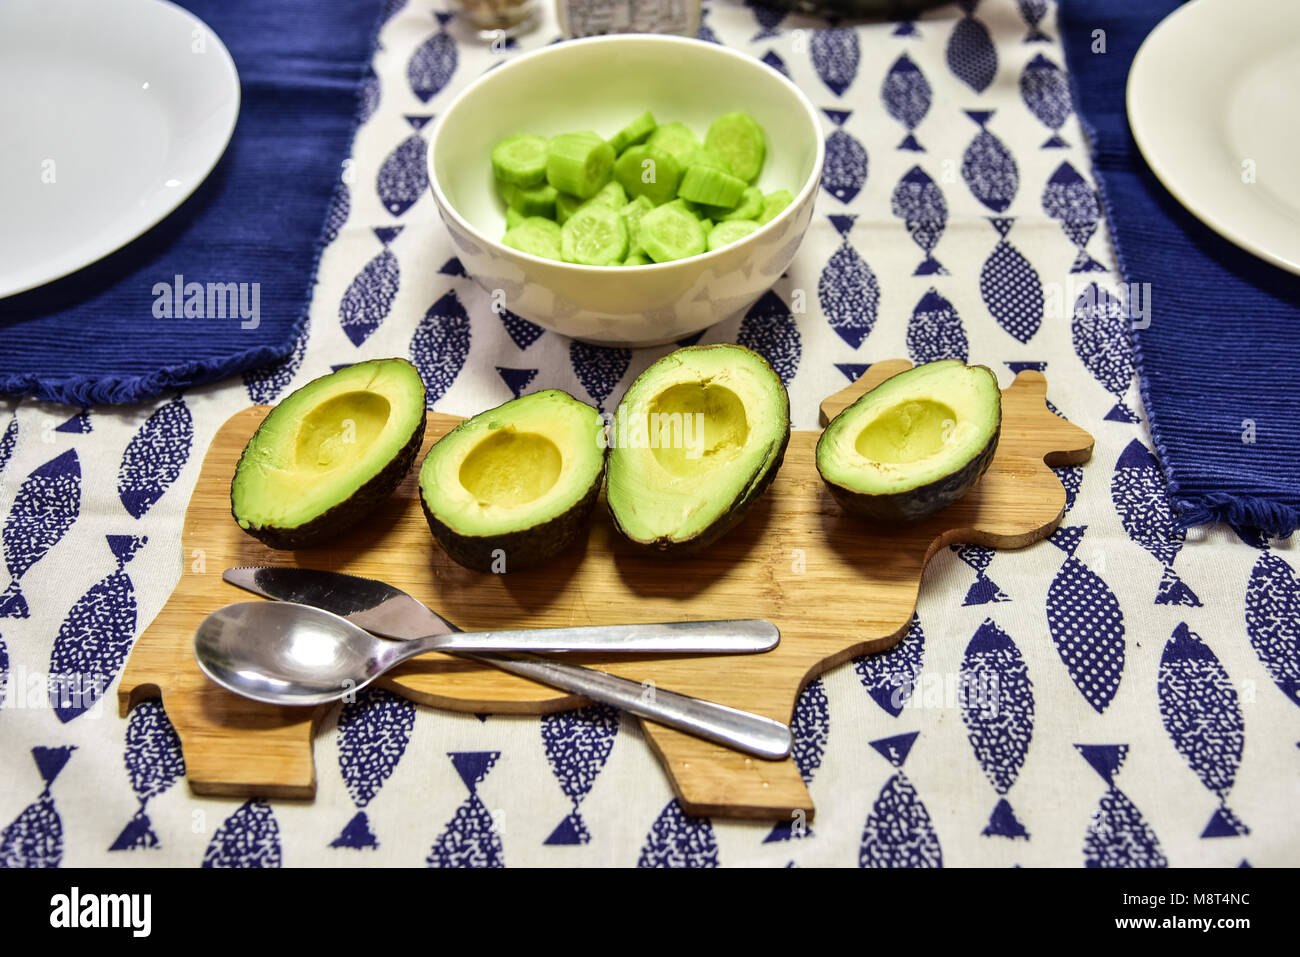 4 halved avocados sit on a cute cow-shaped wooden cutting board. A